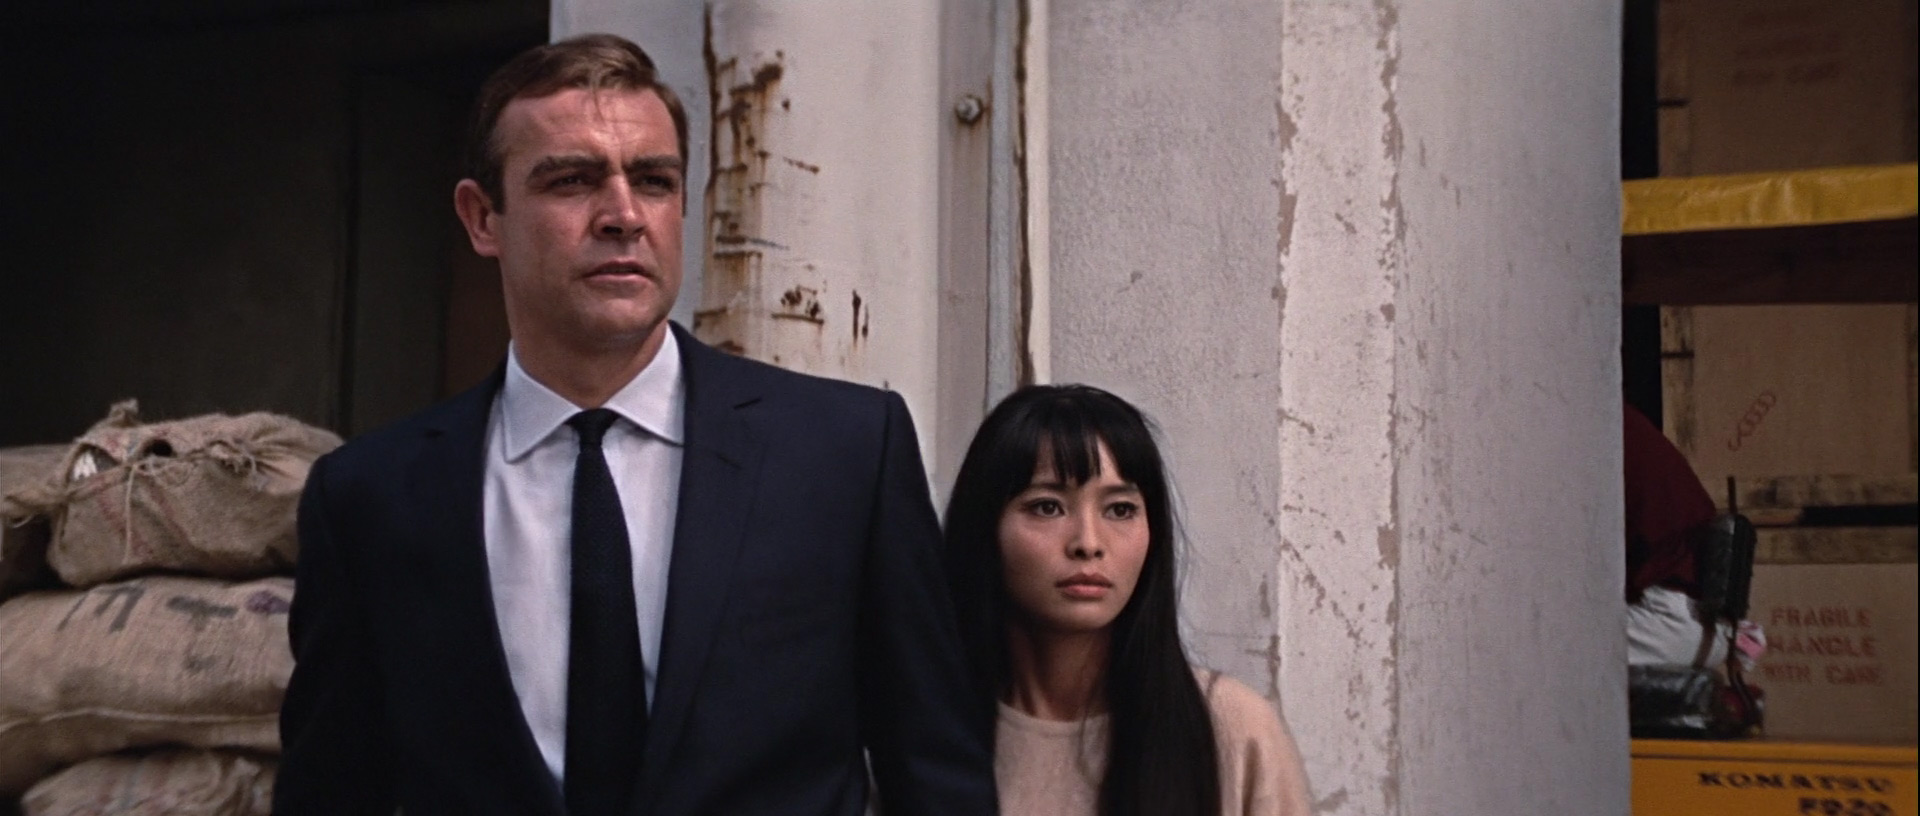 James Bond and Aki in "You Only Live Twice"